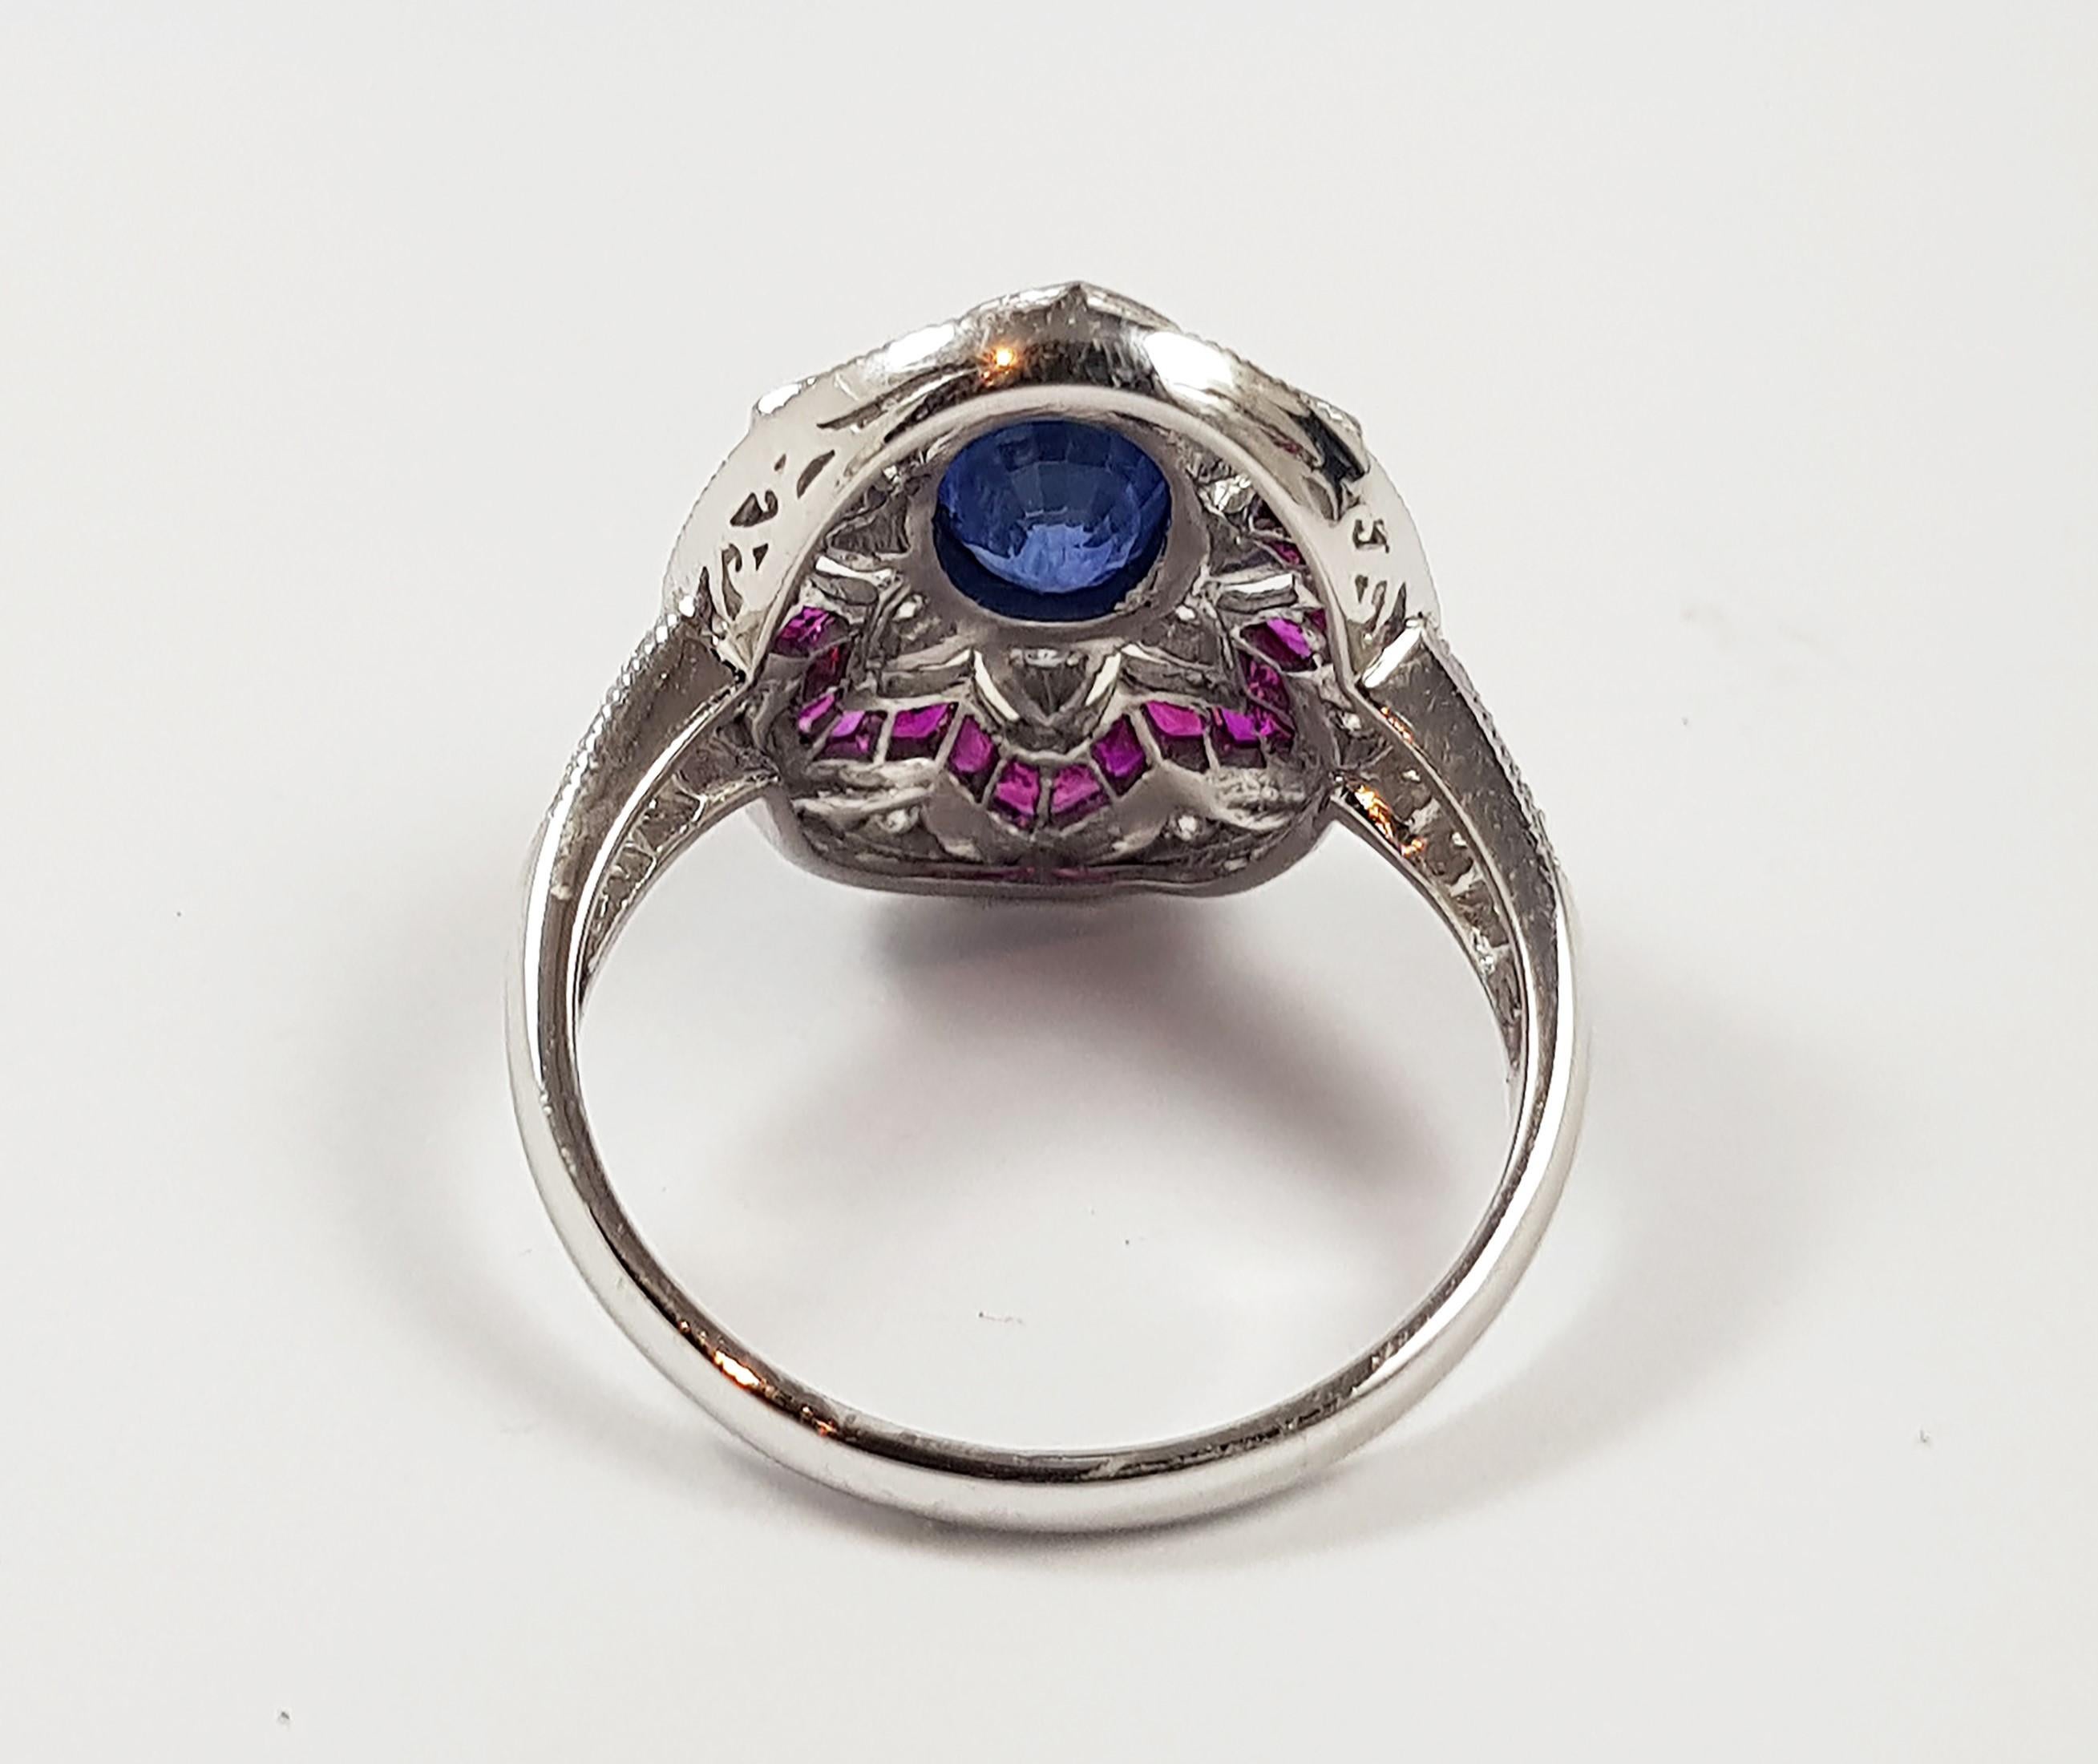 Blue Sapphire 1.09 carats with Ruby 1.98 carats and Diamond 0.25 carat Ring set in 18 Karat White Gold Settings

Width: 1.3 cm
Length: 1.7 cm 
Ring Size: 51

